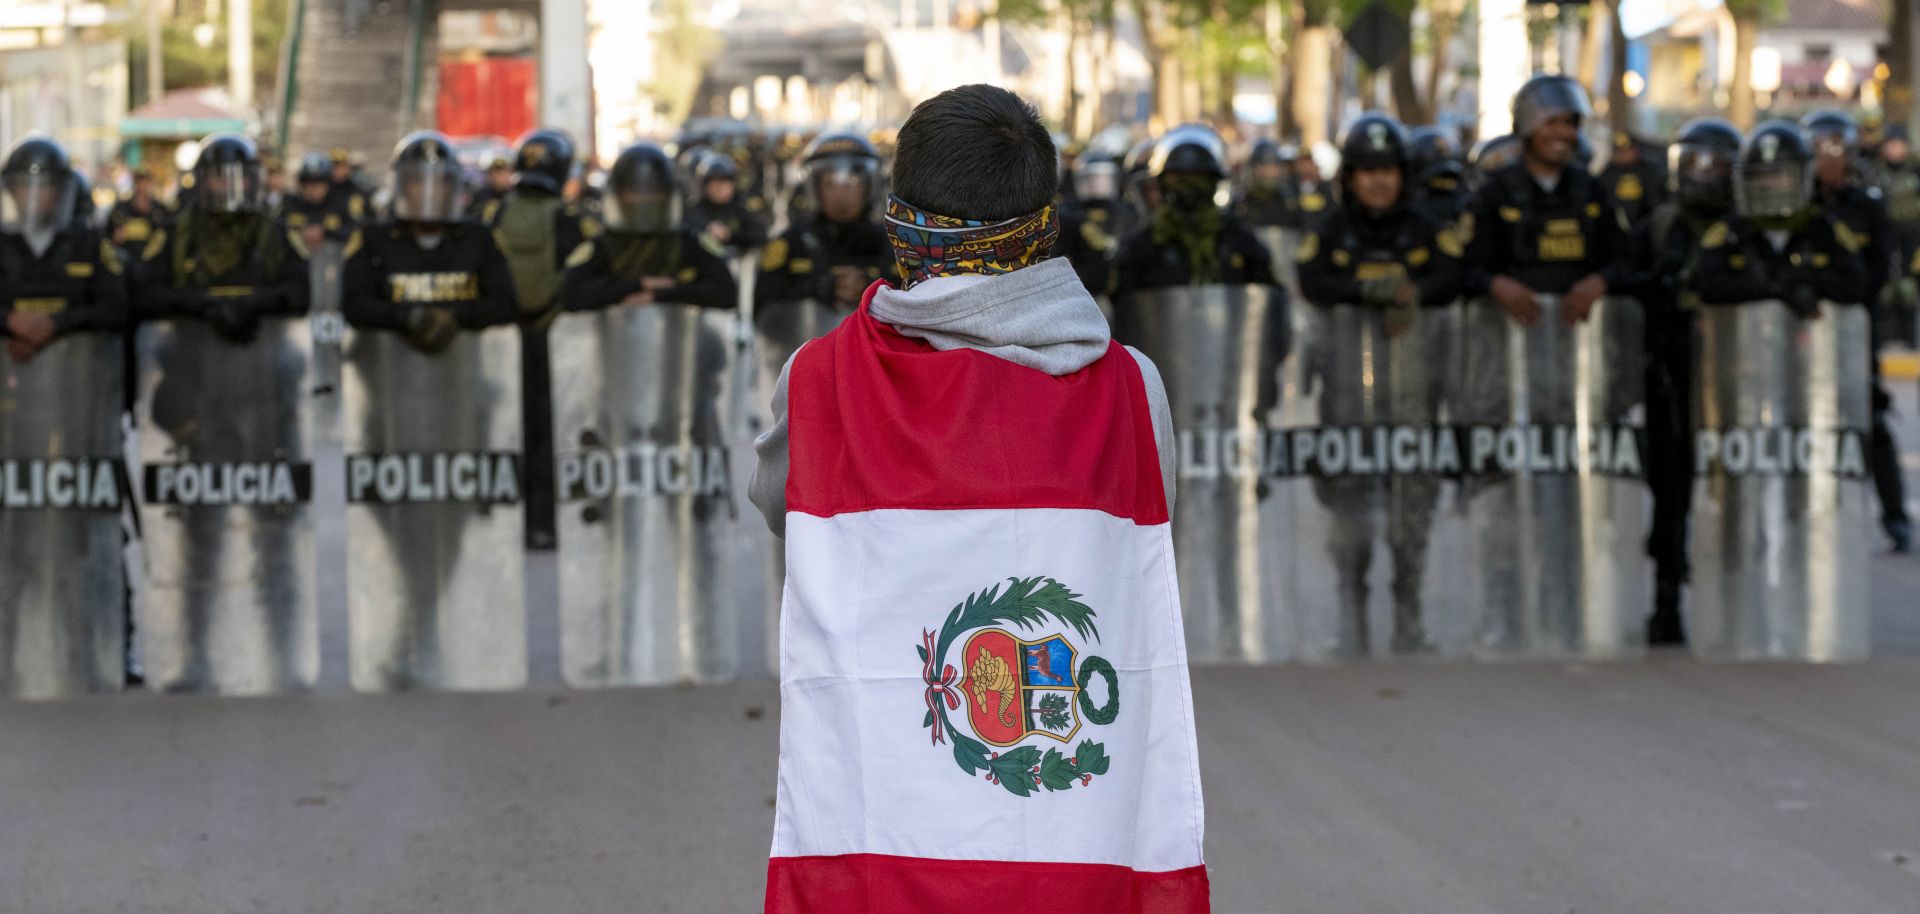 A demonstrator wearing the Peruvian flag stands in front of police officers forming a barrier with their riot shields near the entrance of the airport in Cusco, Peru, on Jan. 19, 2023.